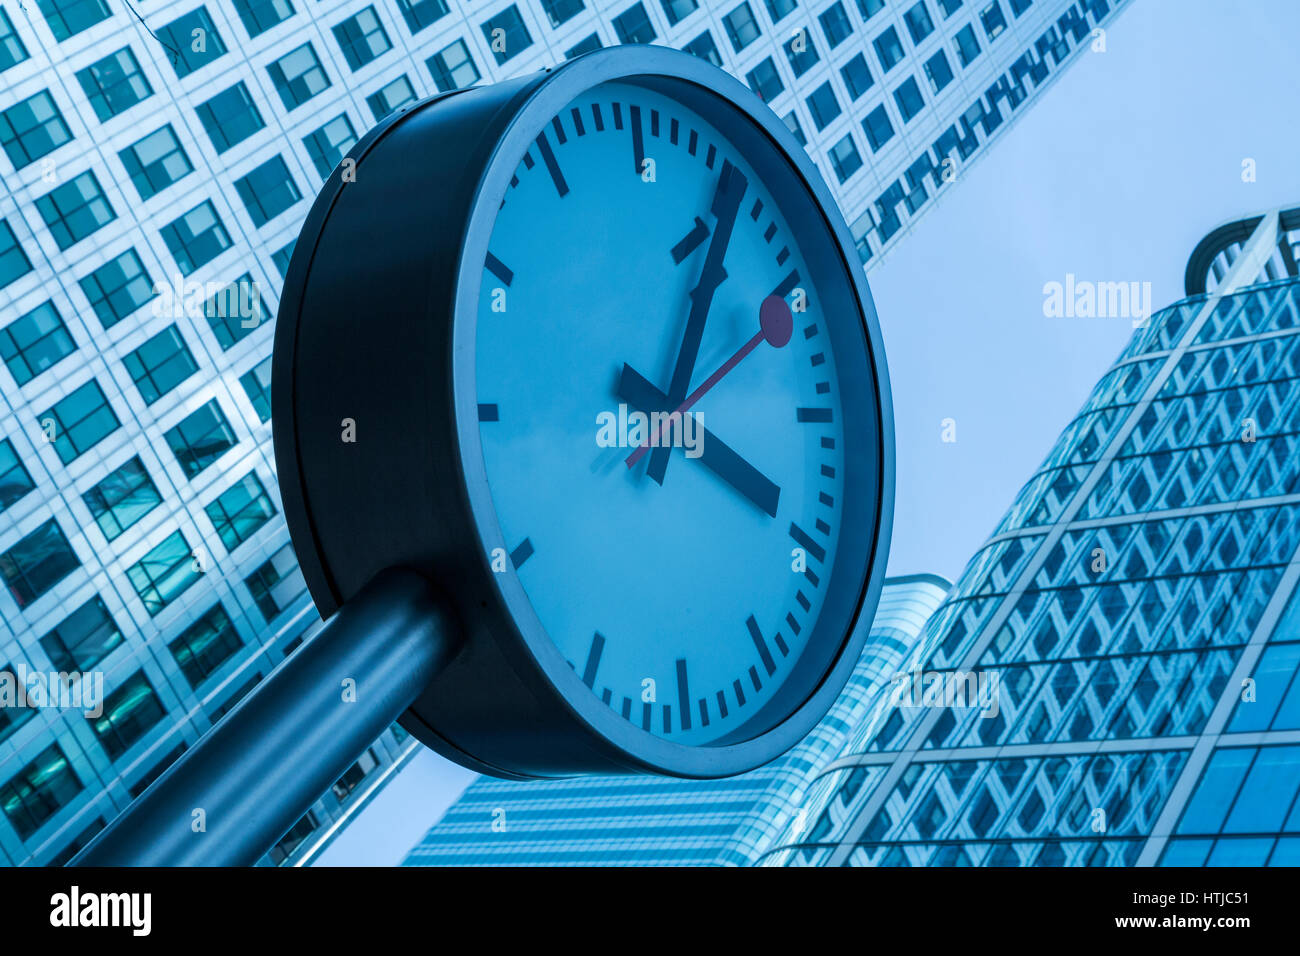 'The clock is ticking' Clock installation with a cold blue tone, and angled ,Canary Wharf, London, England UK Stock Photo